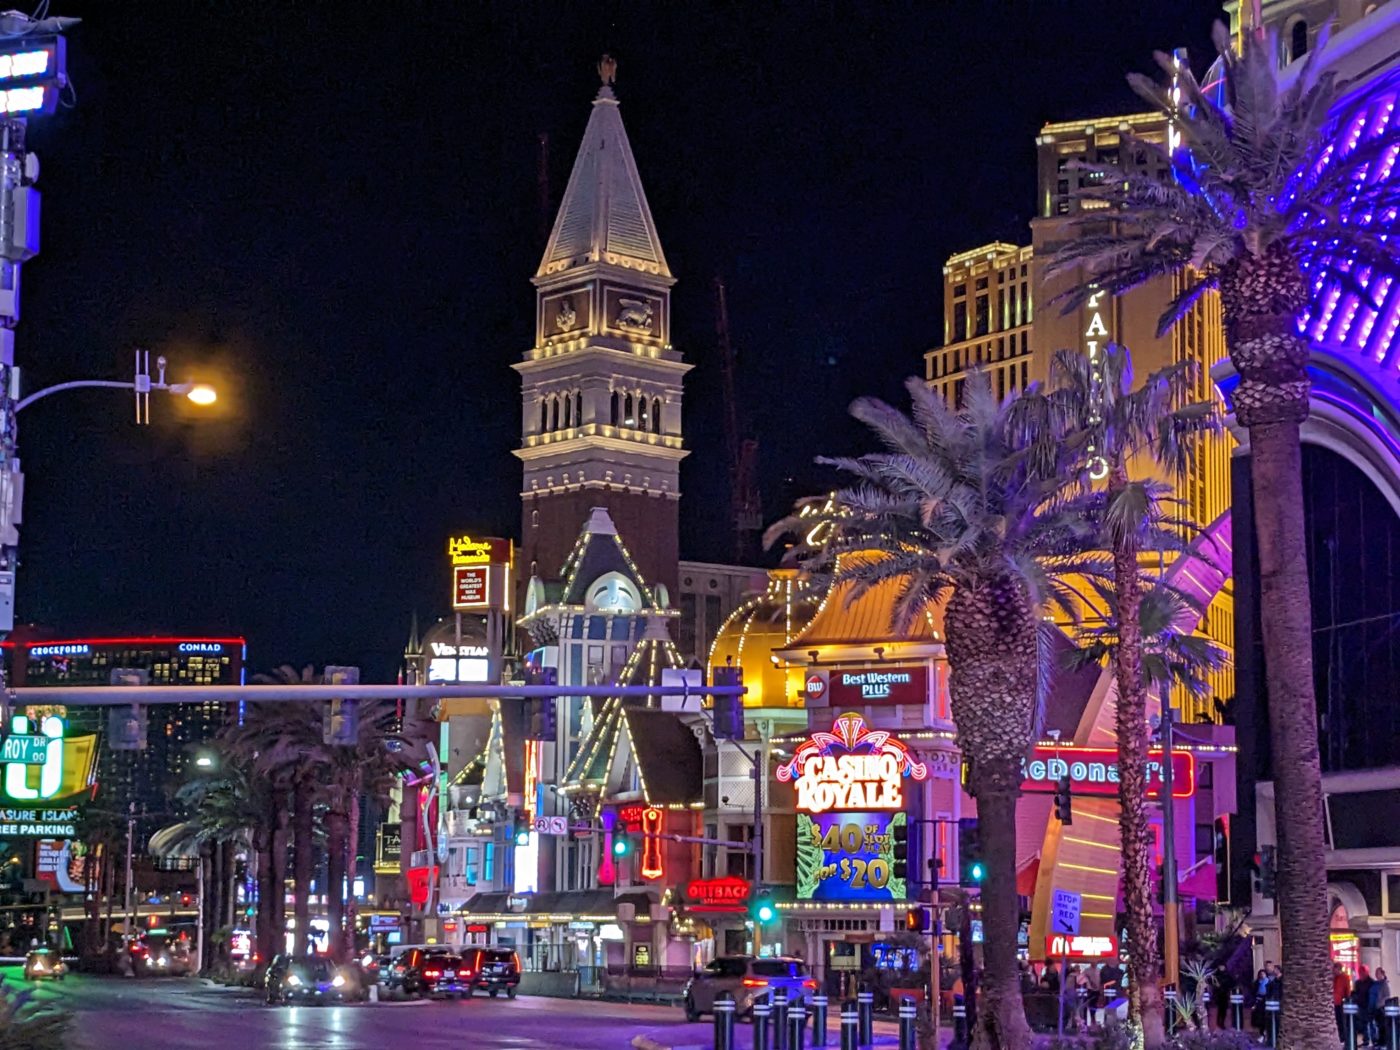 Photo of Las Vegas strip taken at night in February 2023 that includes the Venetian hotel's tower.